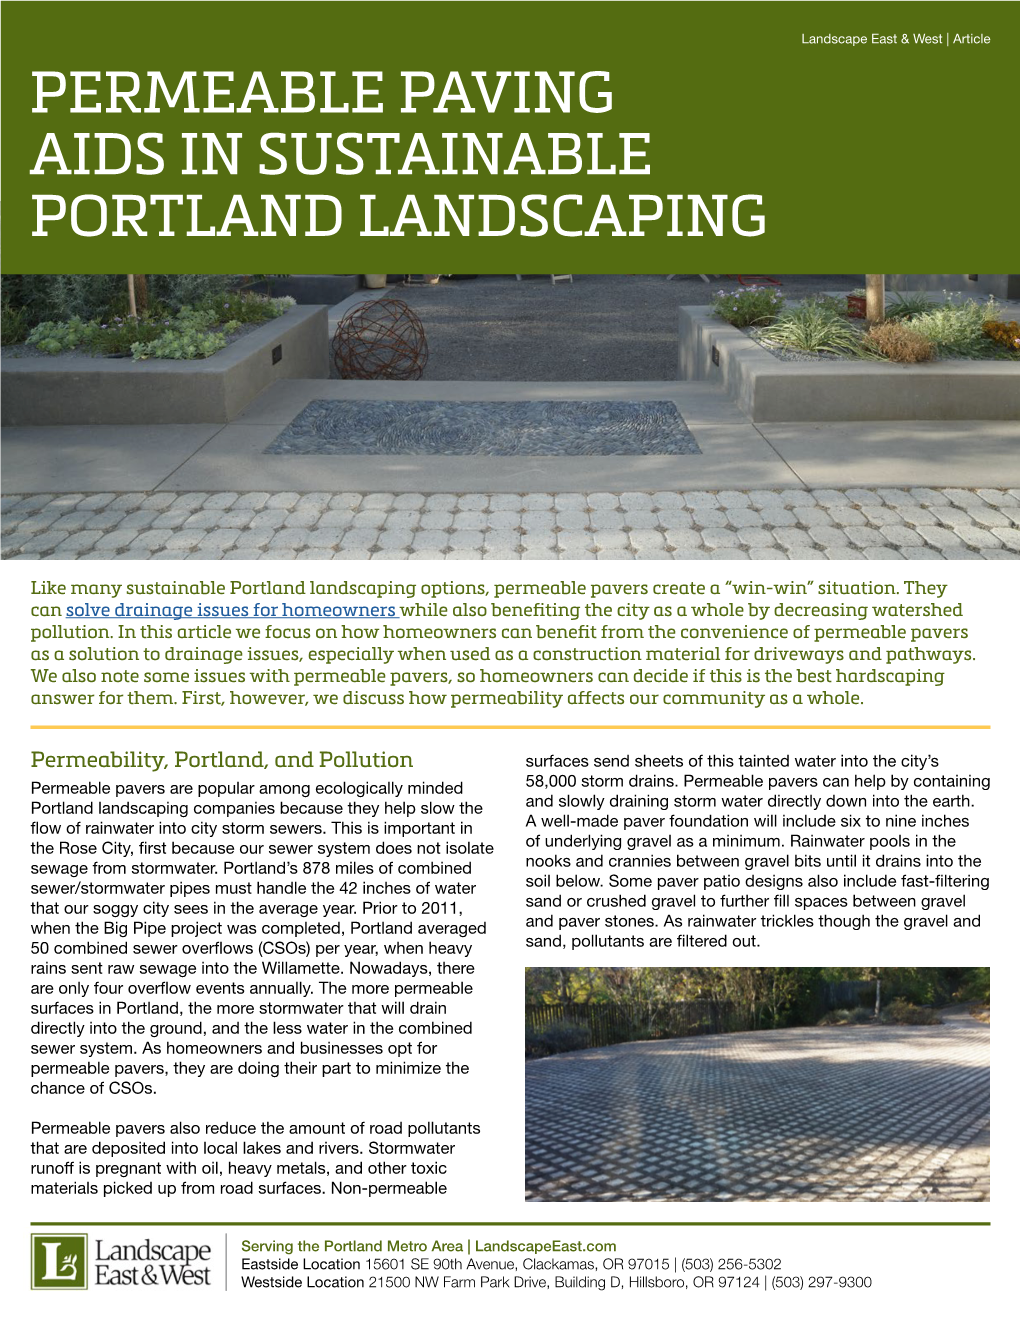 Permeable Paving Aids in Sustainable Portland Landscaping